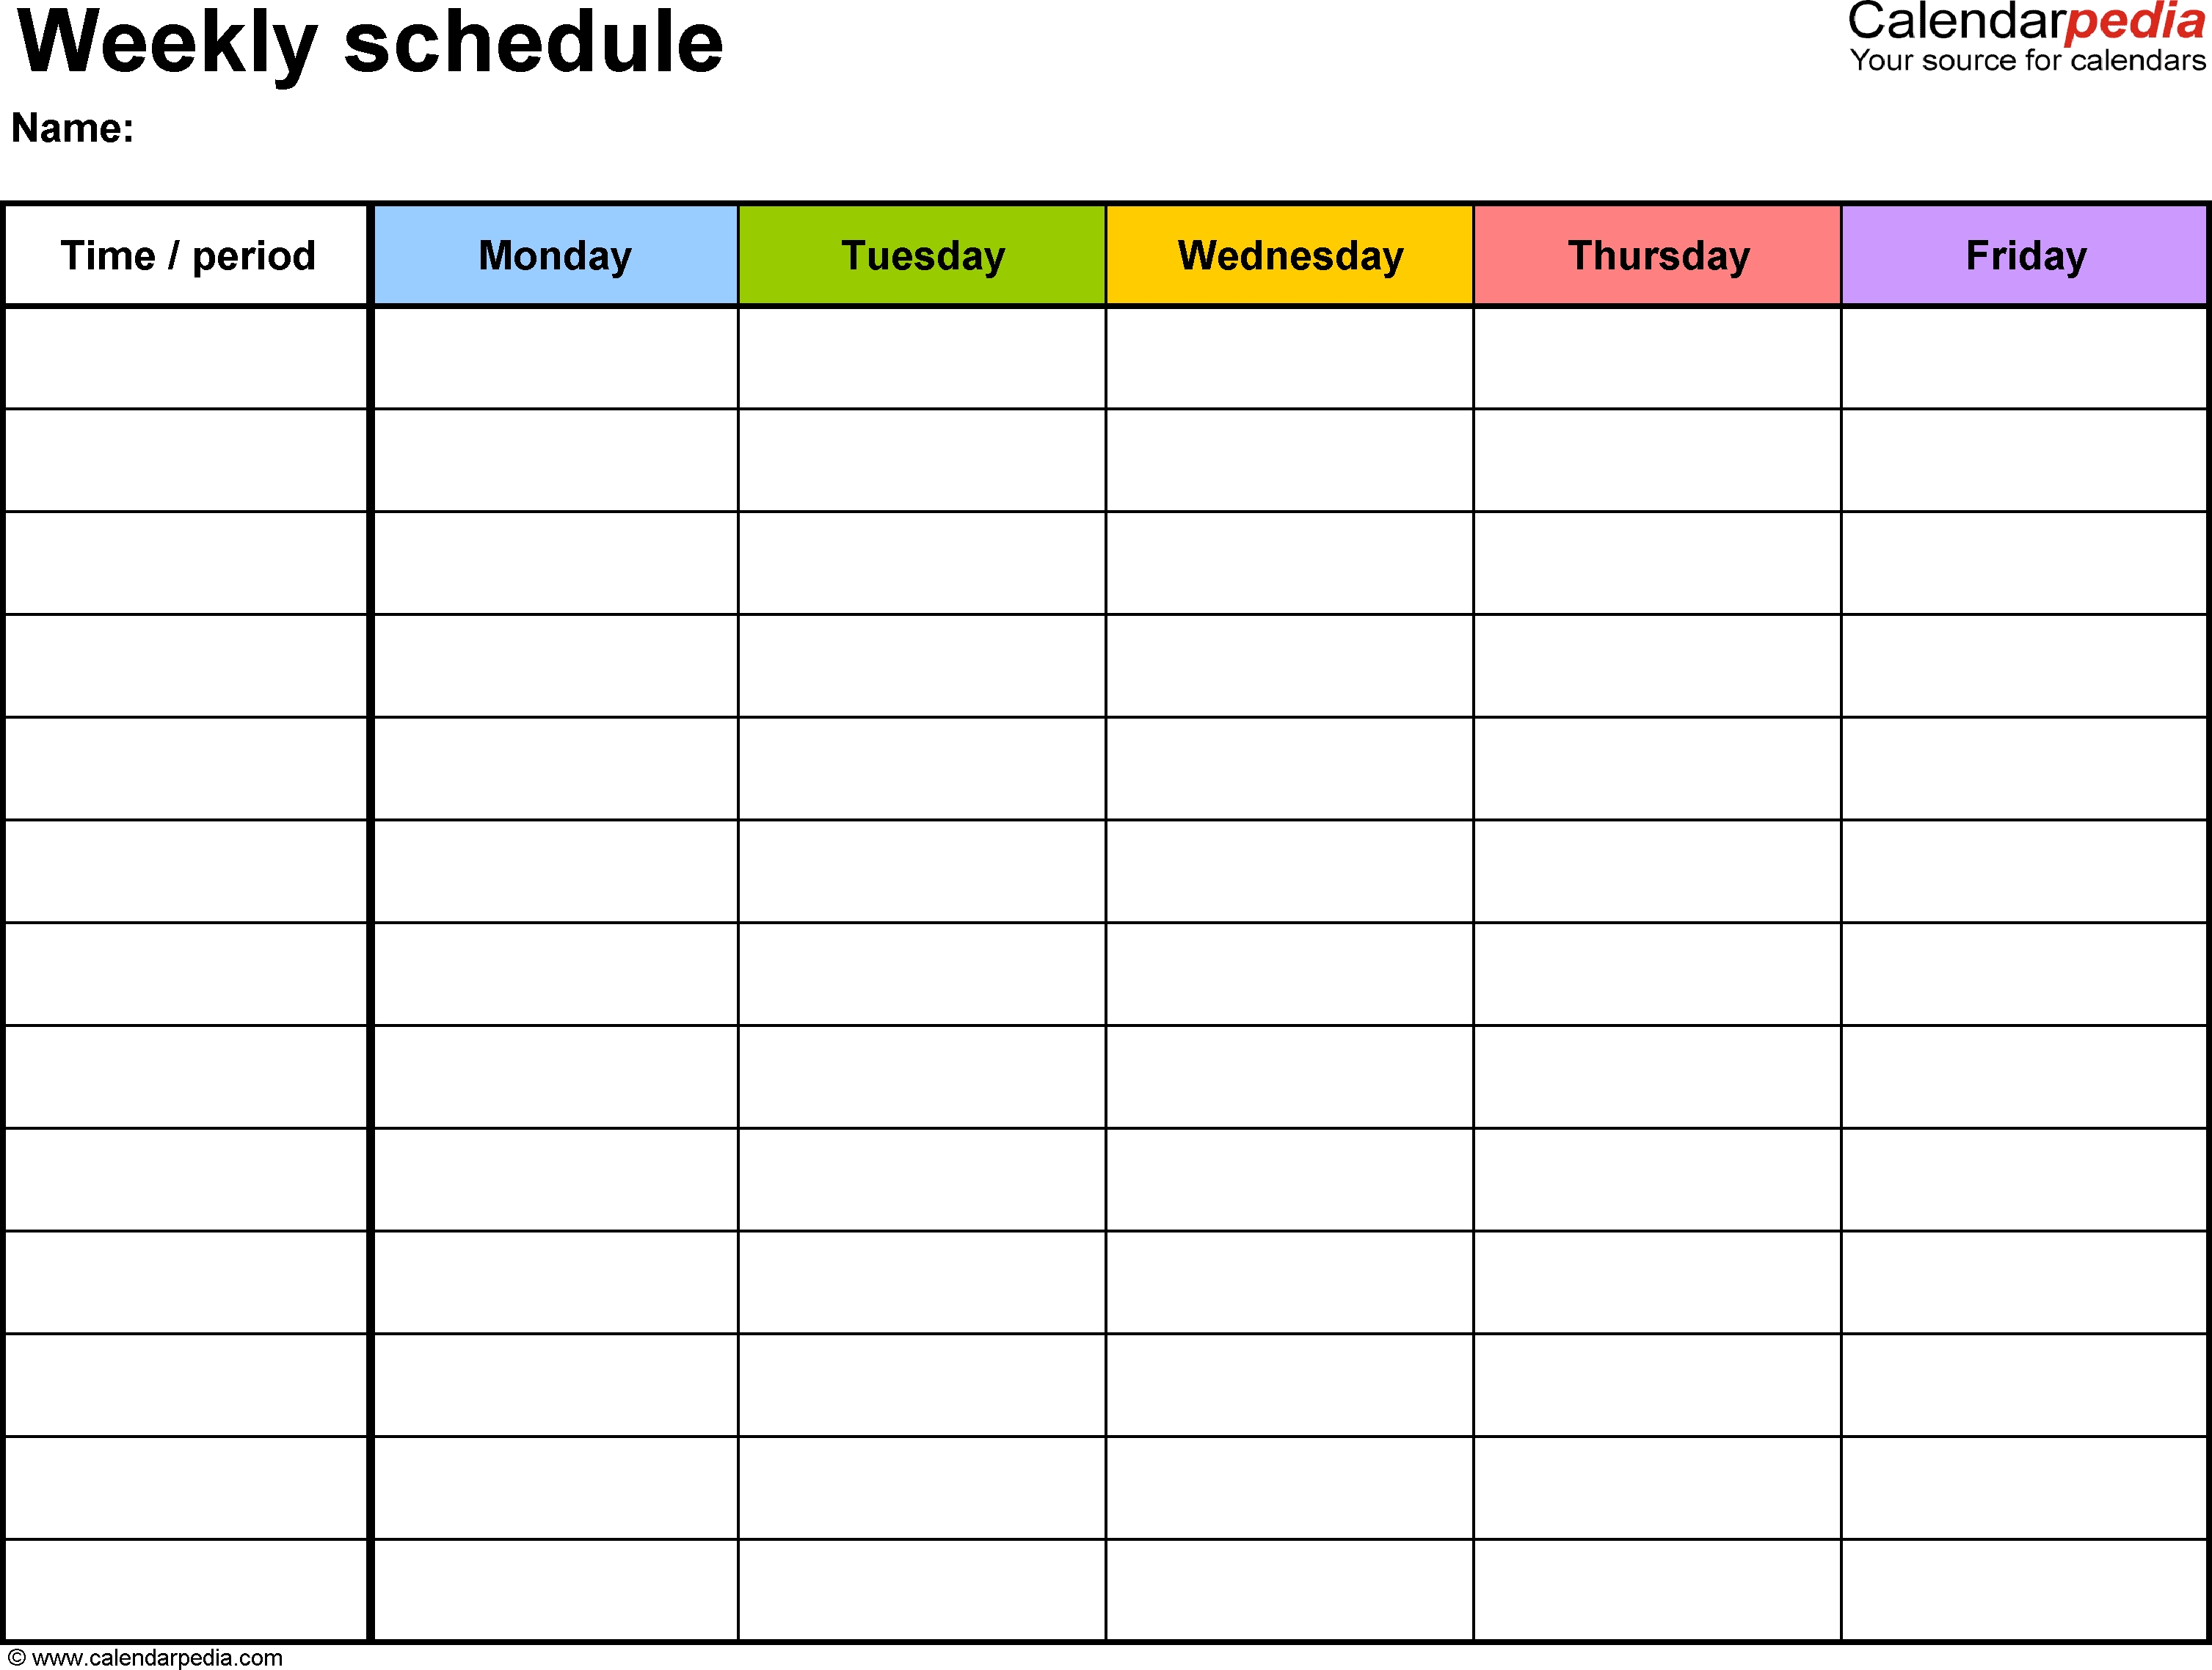 Weekly Schedule Template For Word Version 1: Landscape, 1 5 Day Work Calendar Template